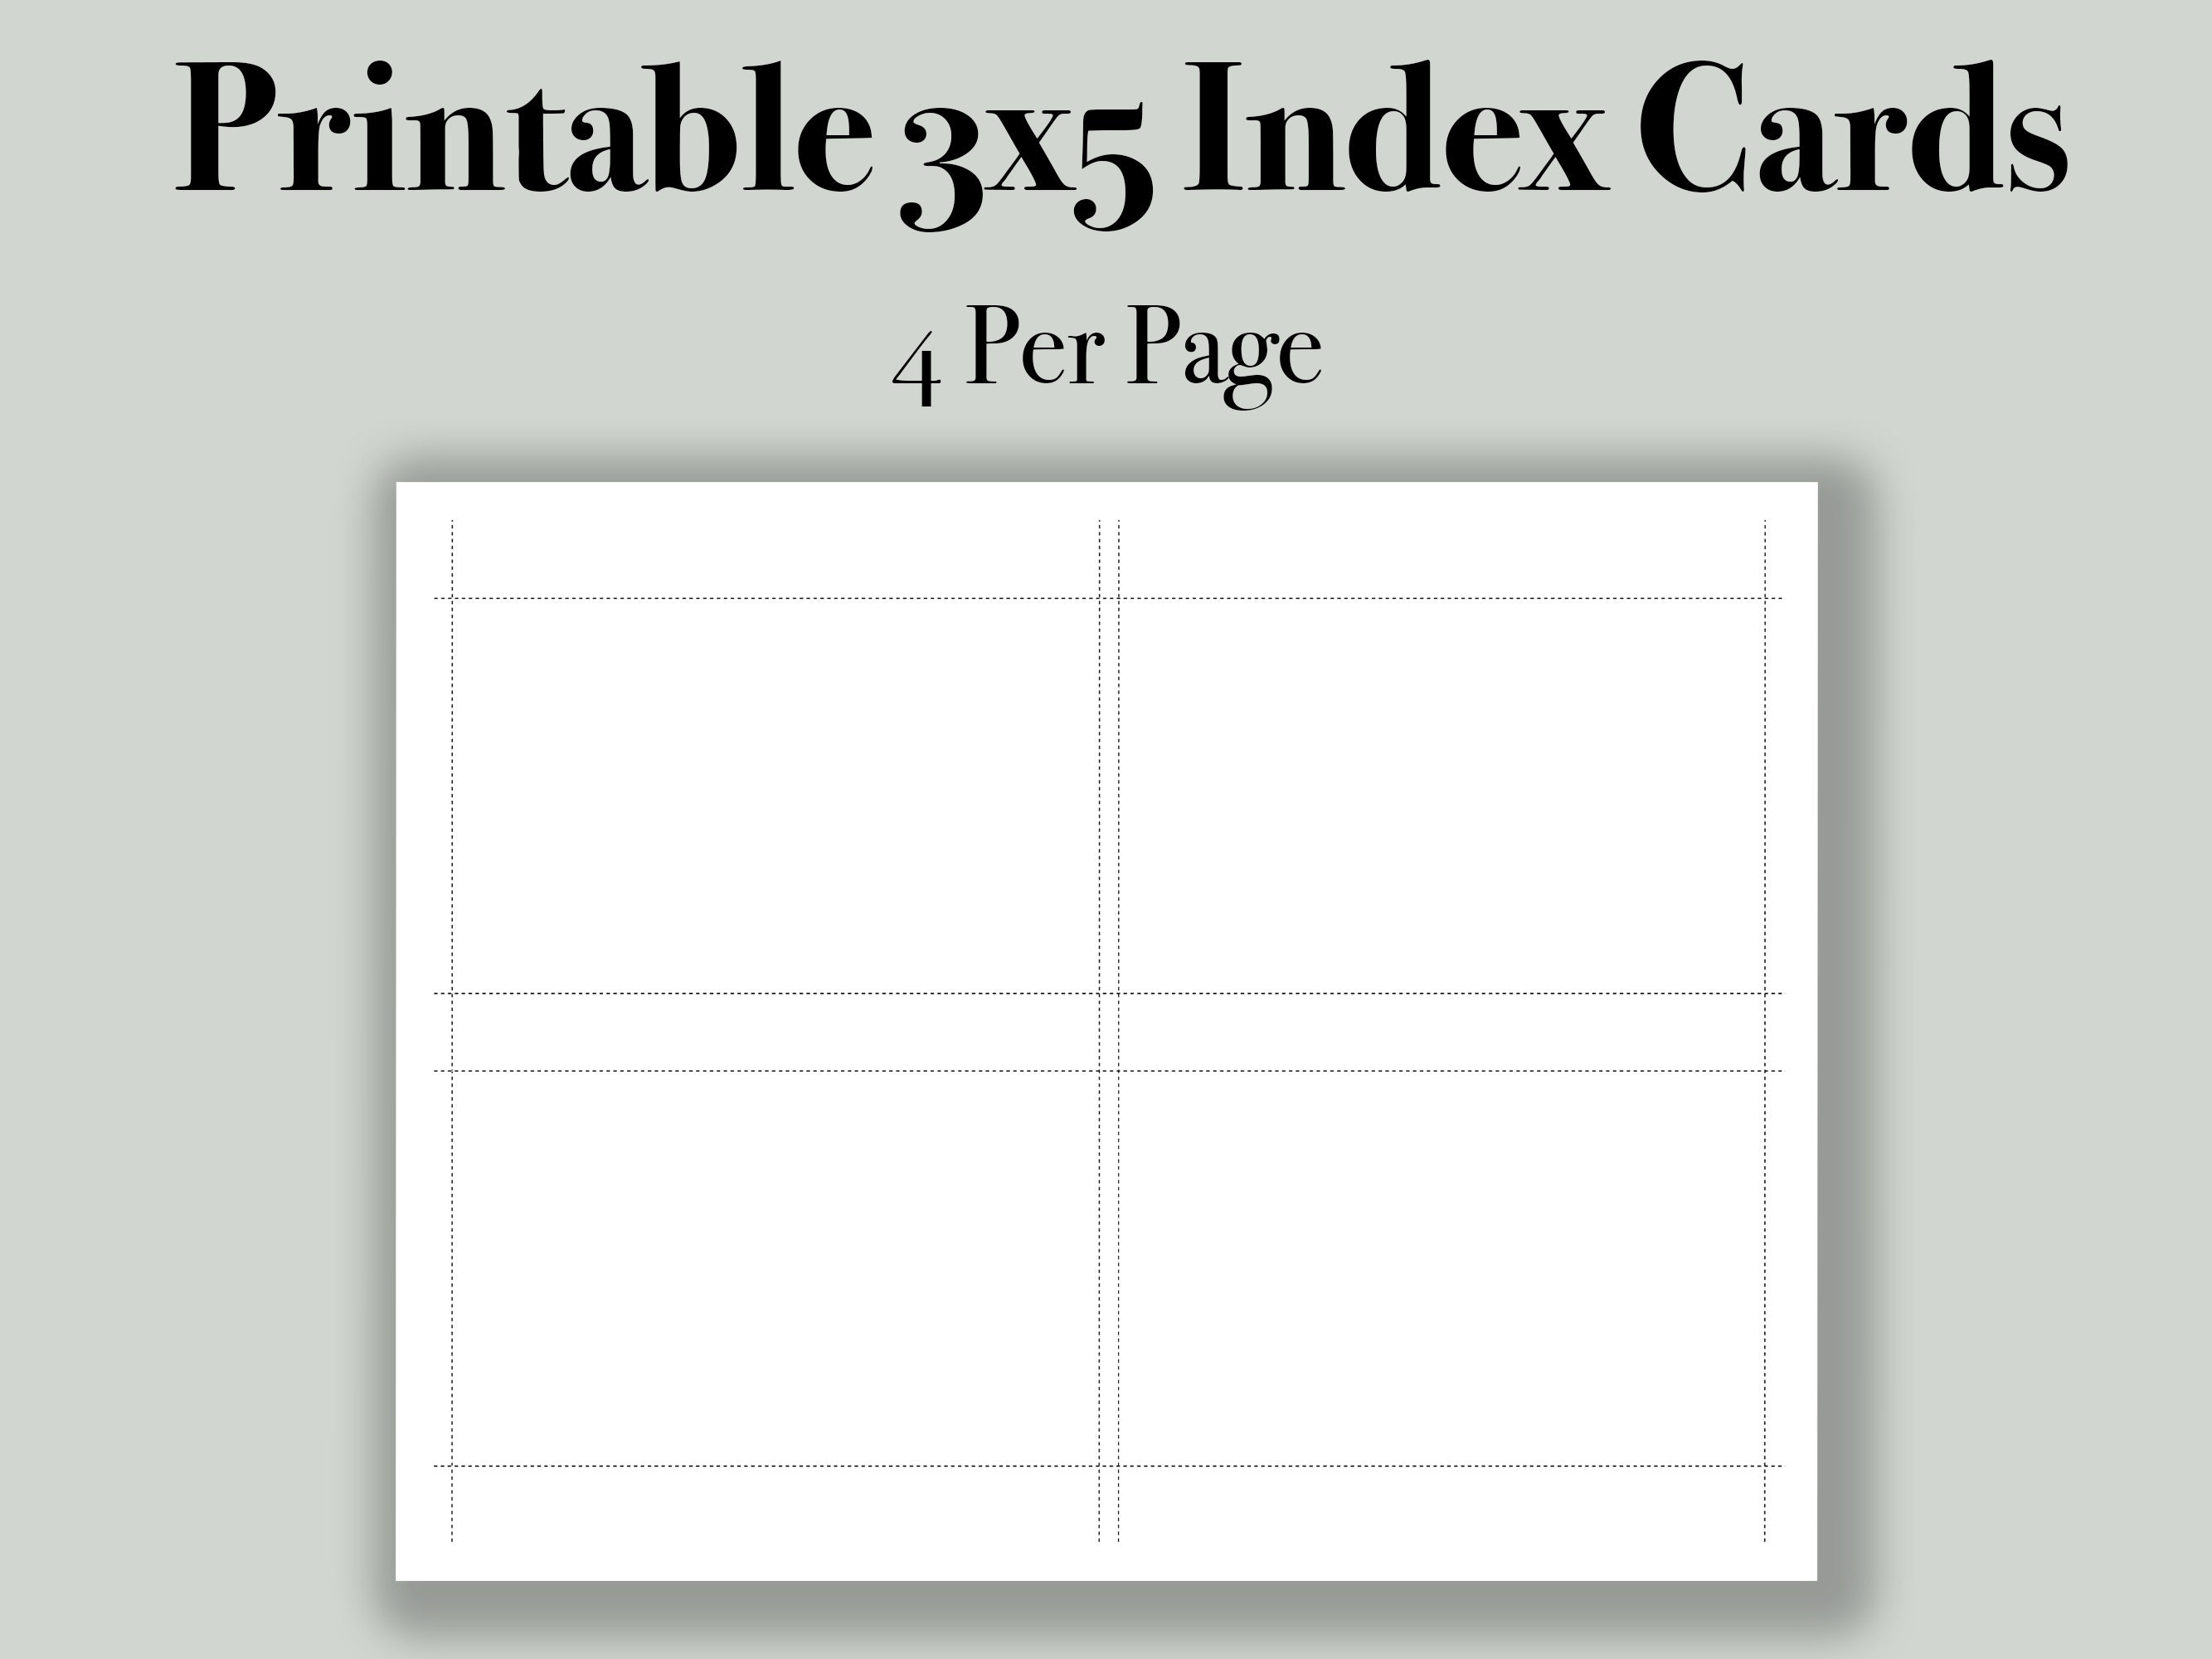 how-to-print-on-3x5-index-cards-using-a-printer-mserloc